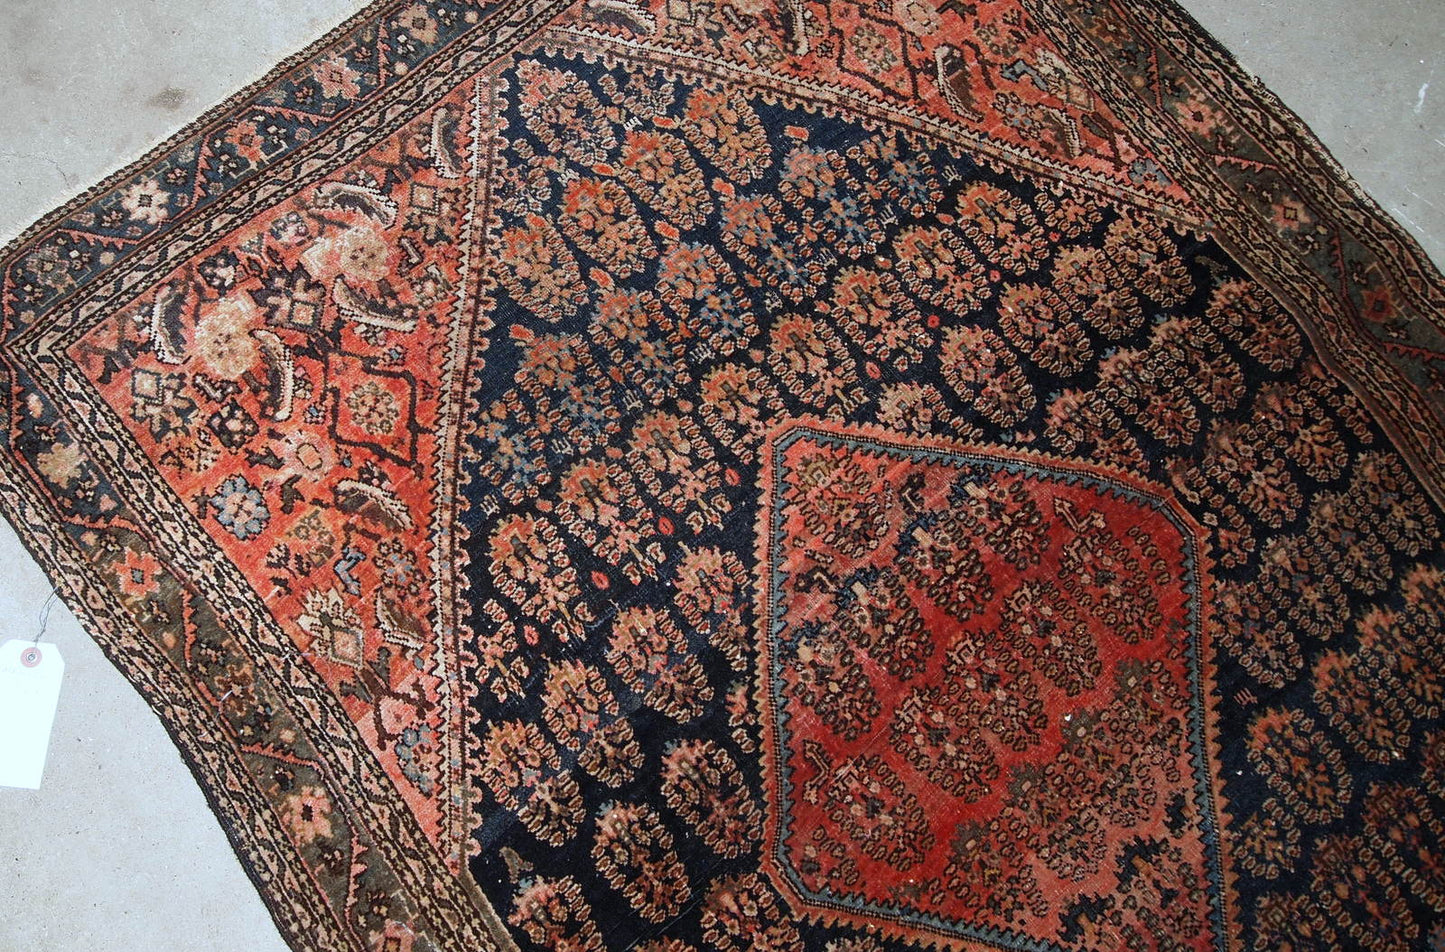 Handmade antique Persian Farahan rug in original good condition. The rug is from the beginning of 20th century made in floral and geometric designs.